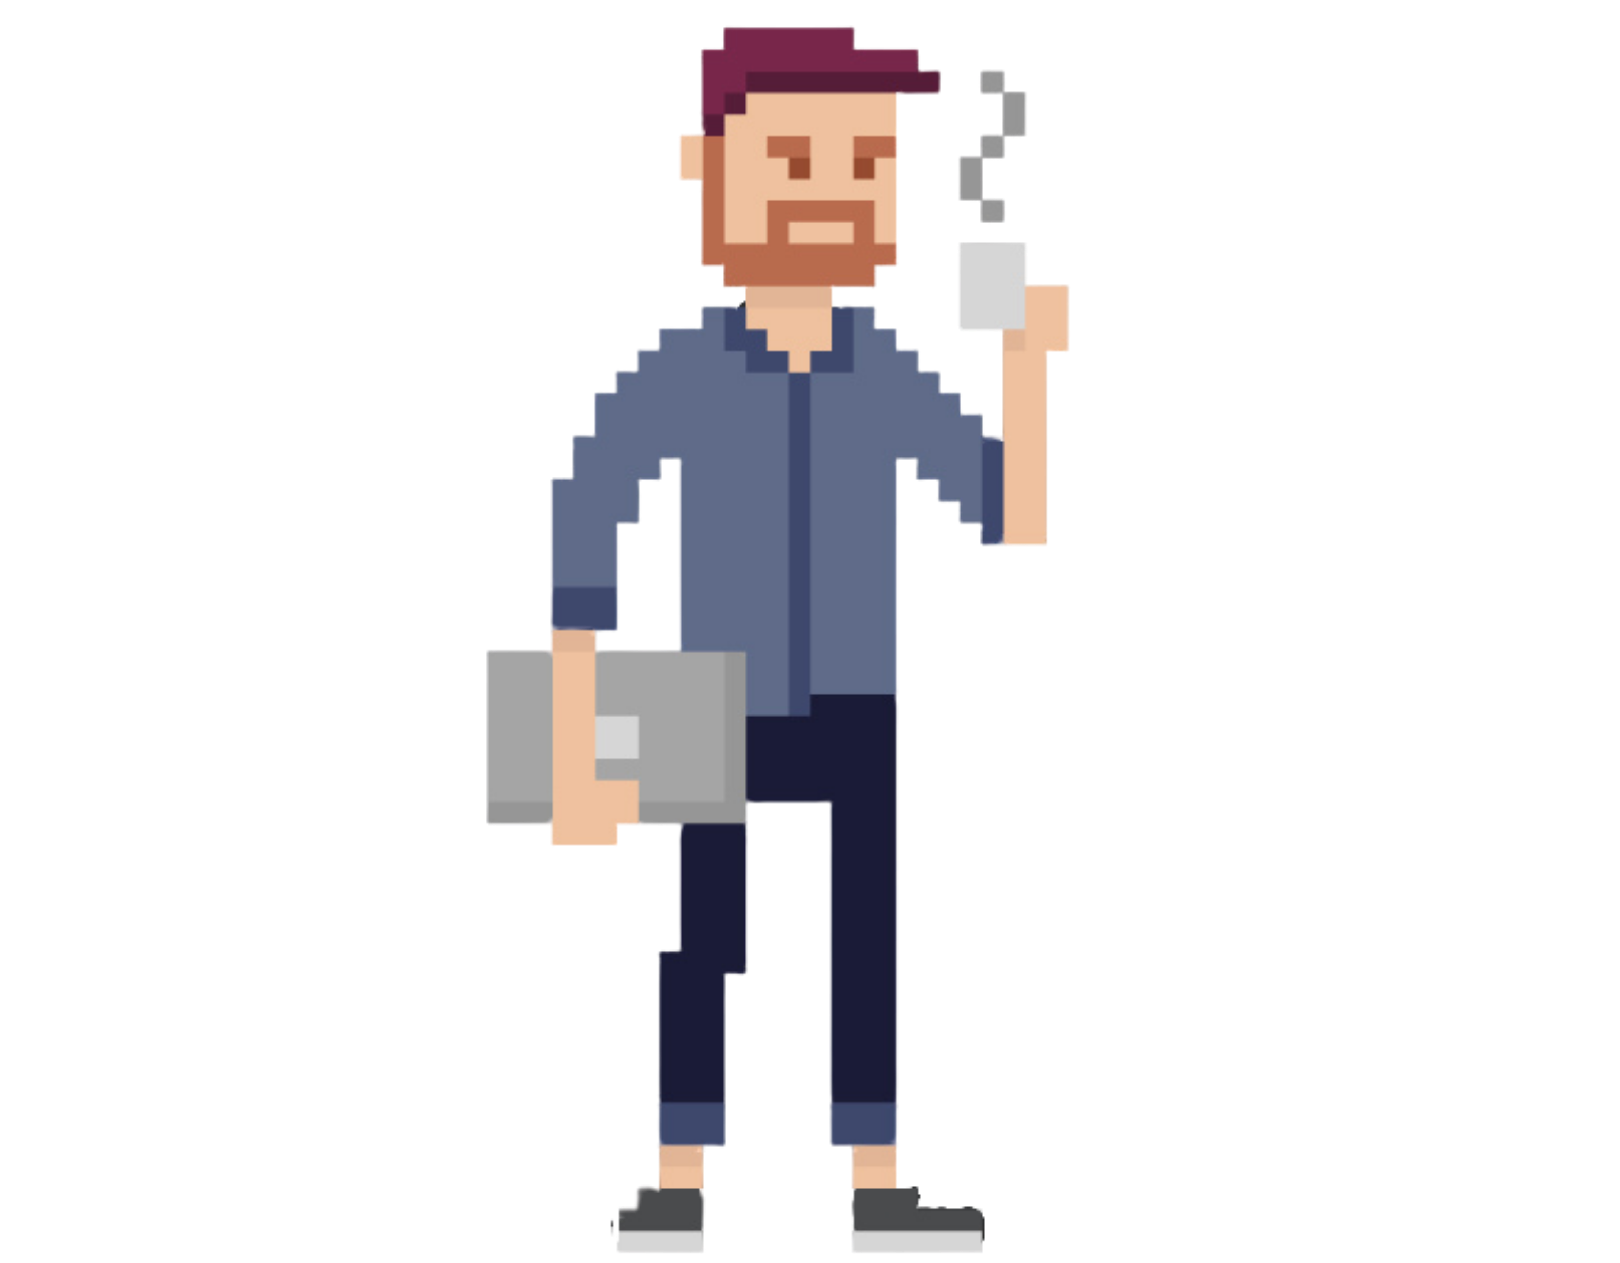 Pixel drawing of a man carrying a laptop and cup of coffee